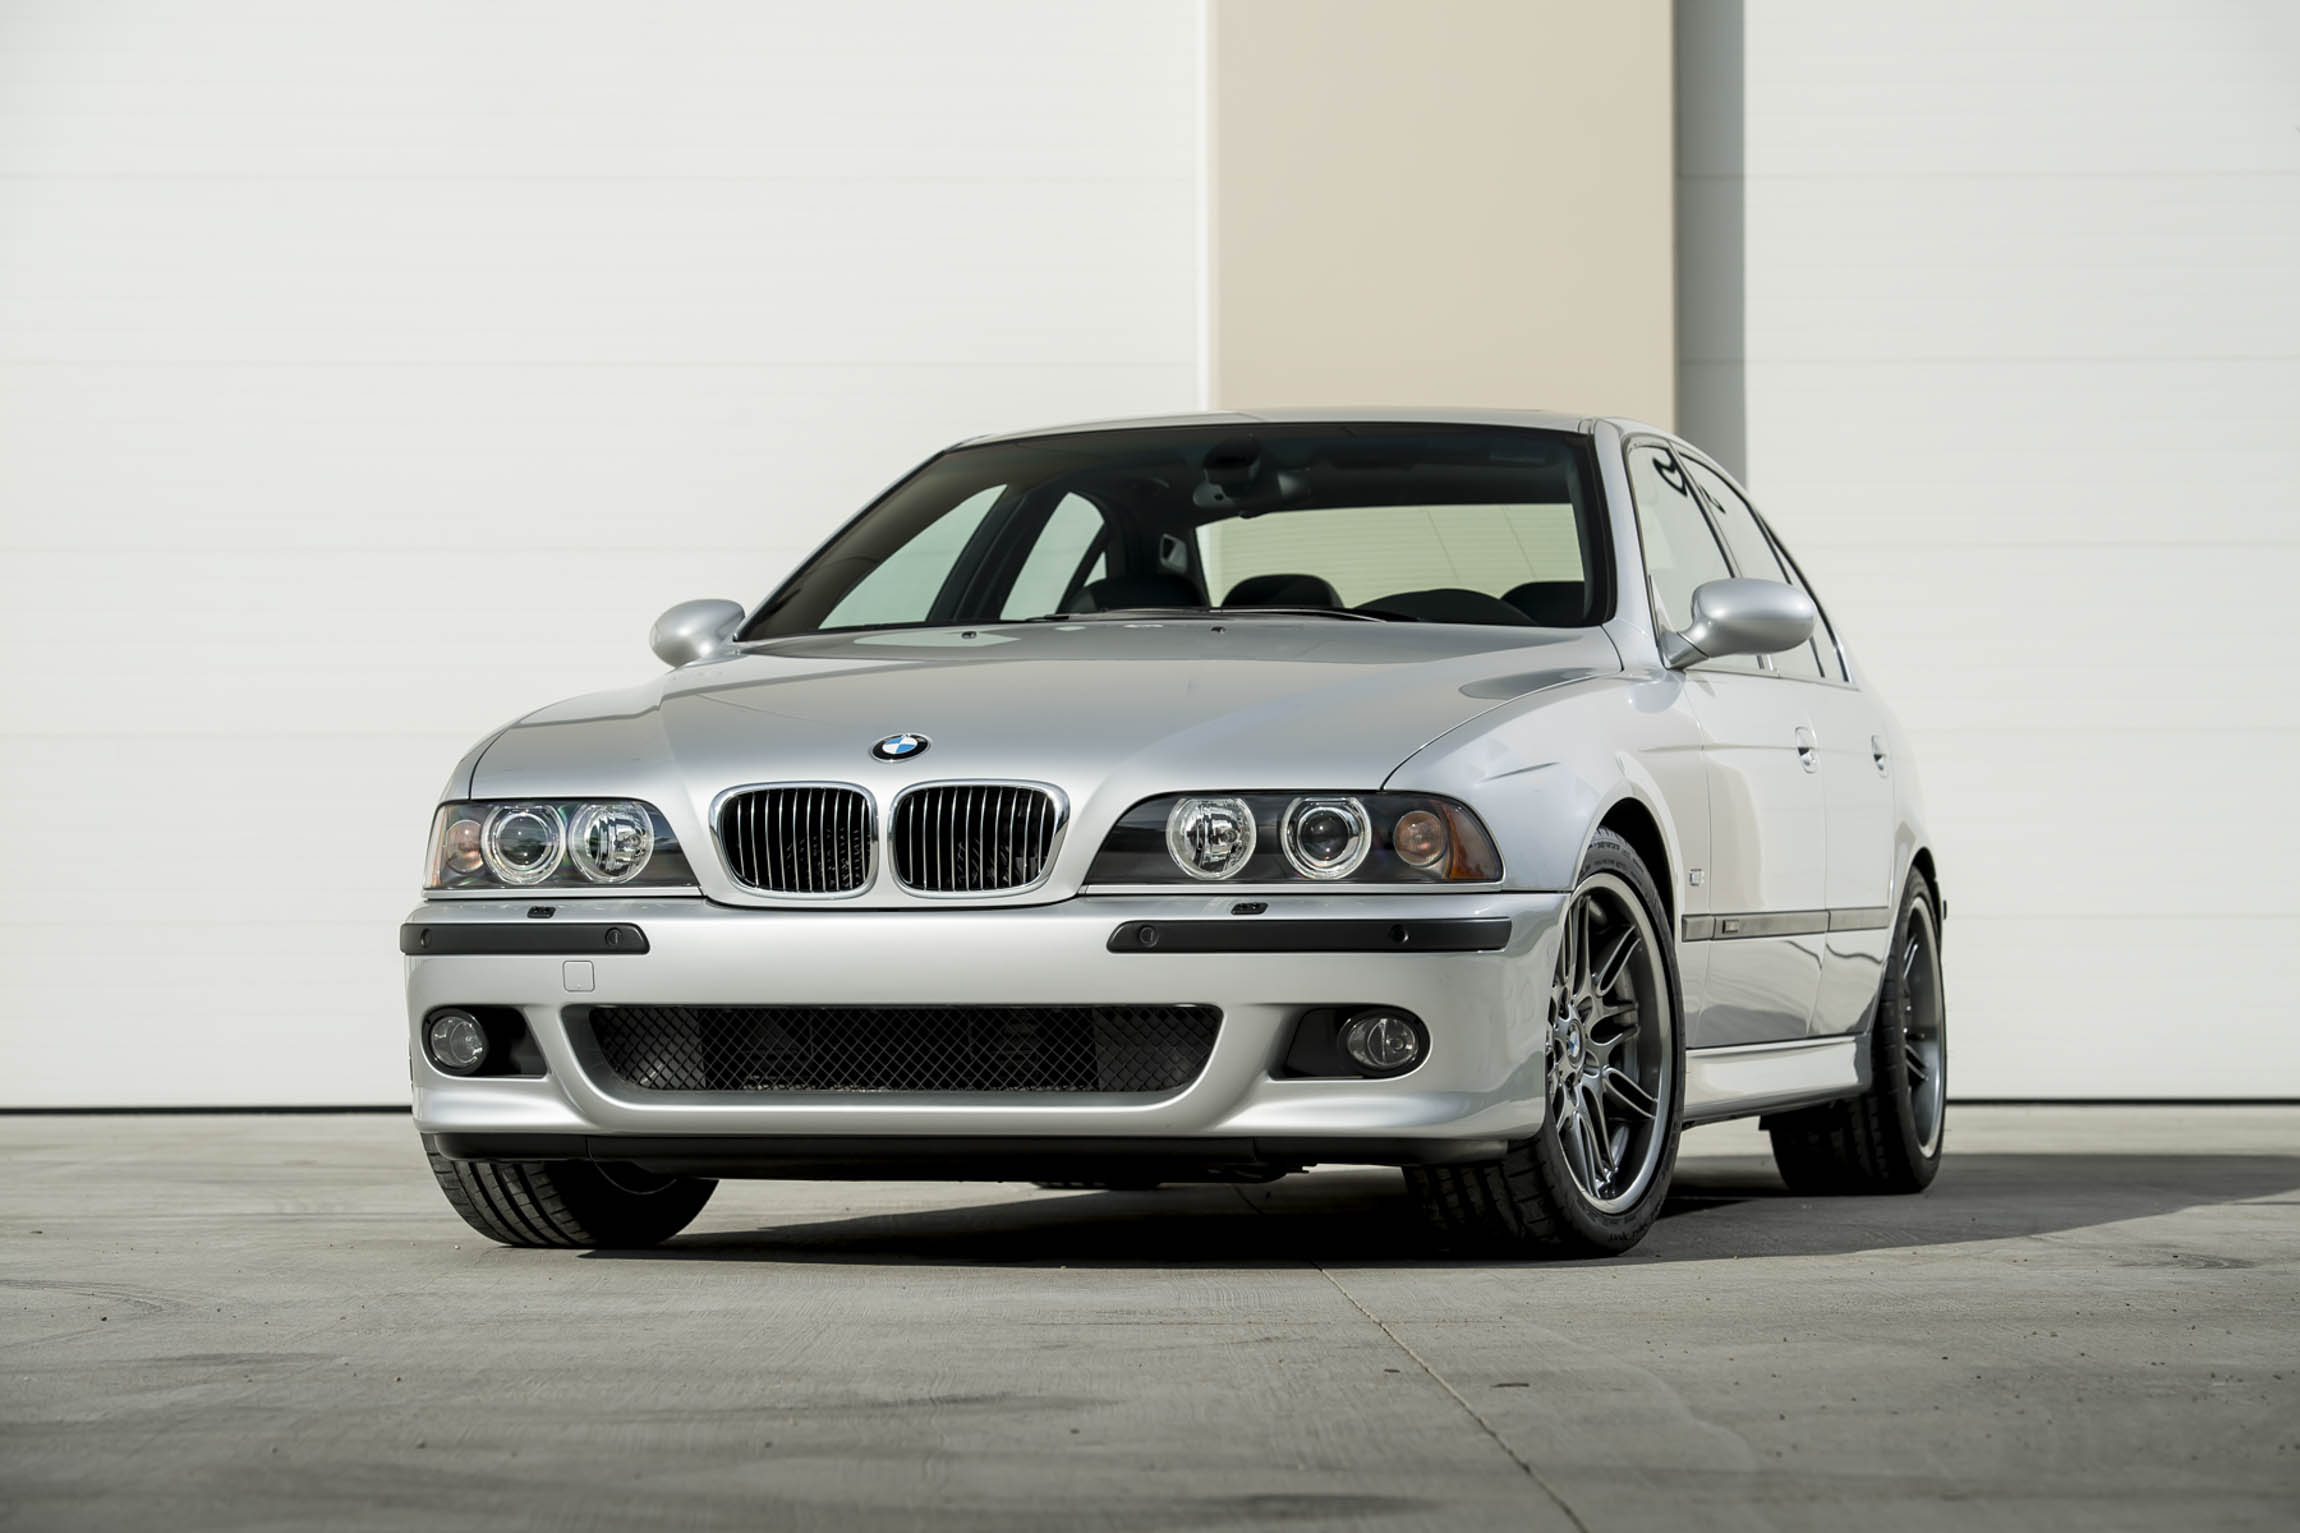 This E39 BMW M5 is a perfect end-of-year heat check